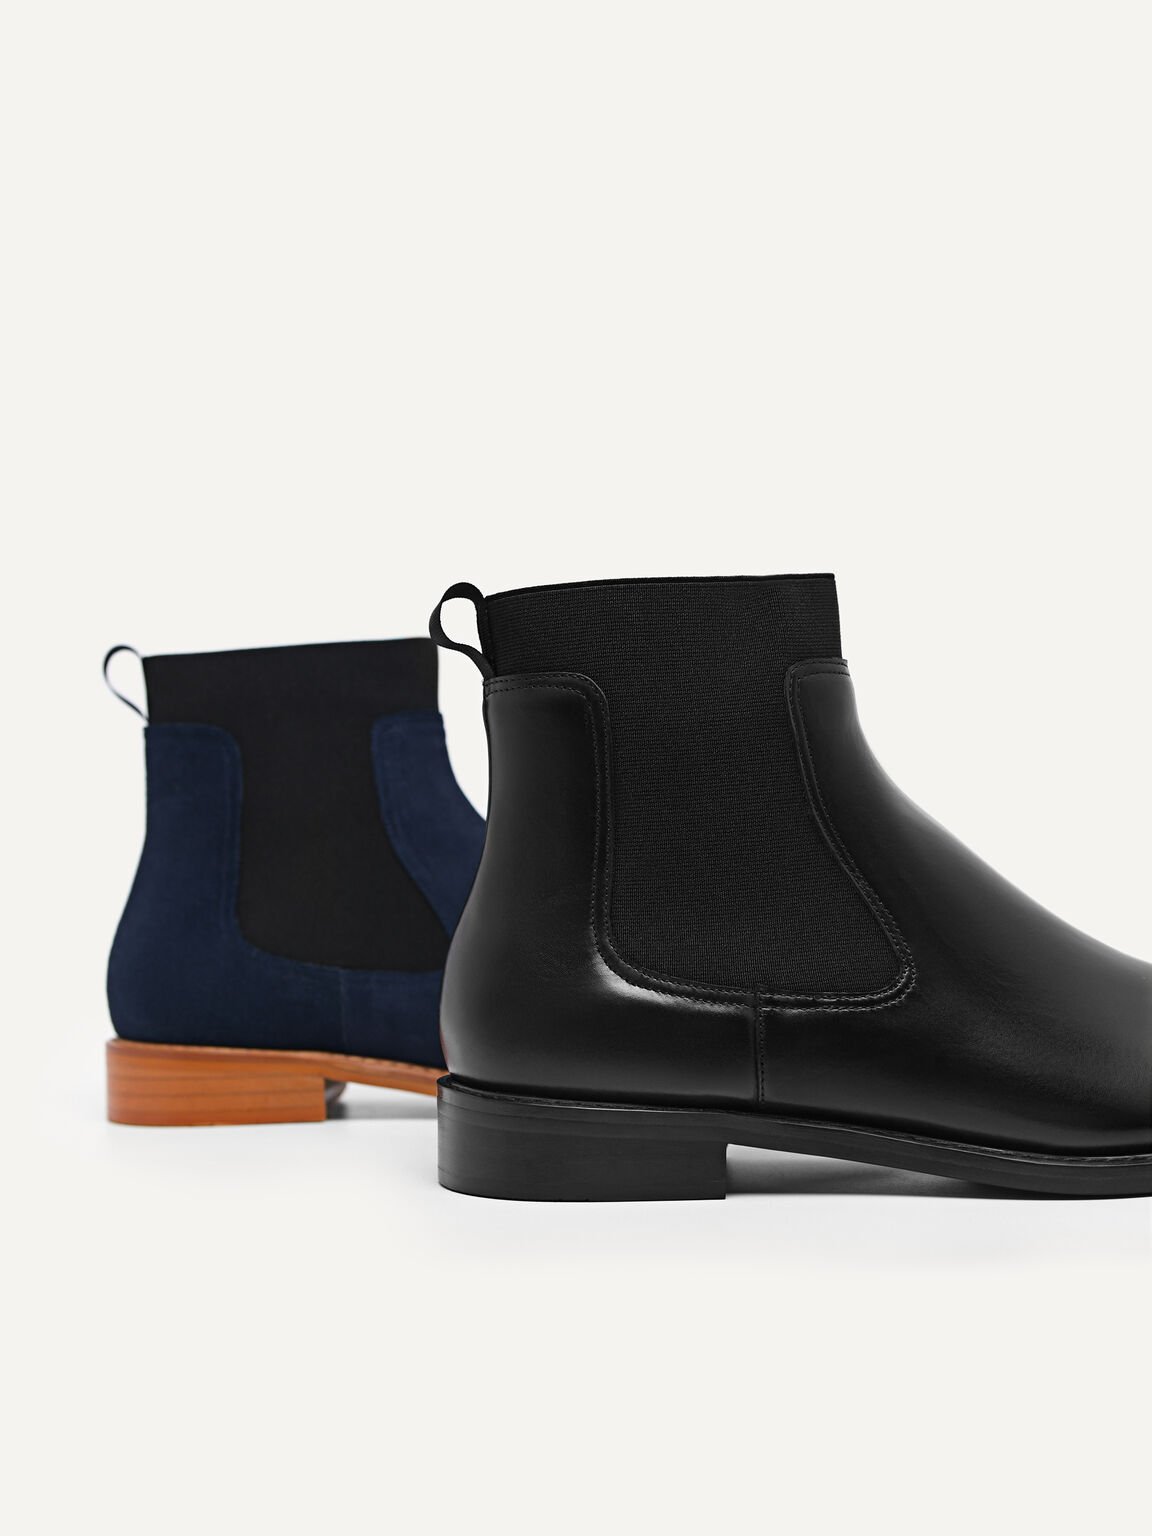 Suede Leather Chelsea Boots, Navy